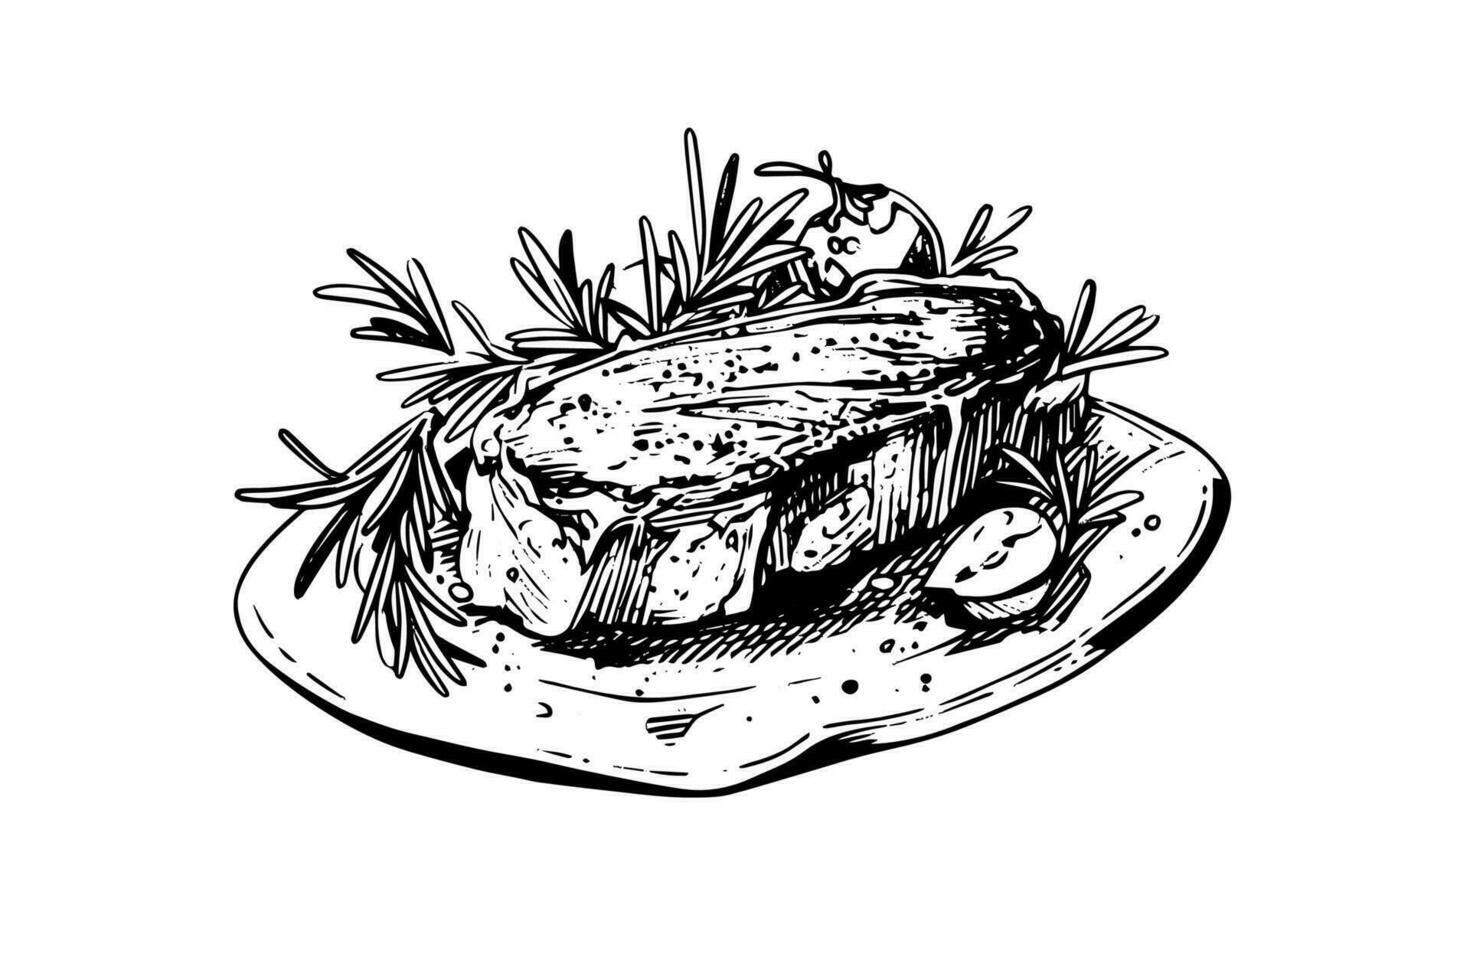 Meat steak on the plate. Hand drawing sketch engraving style vector illustration